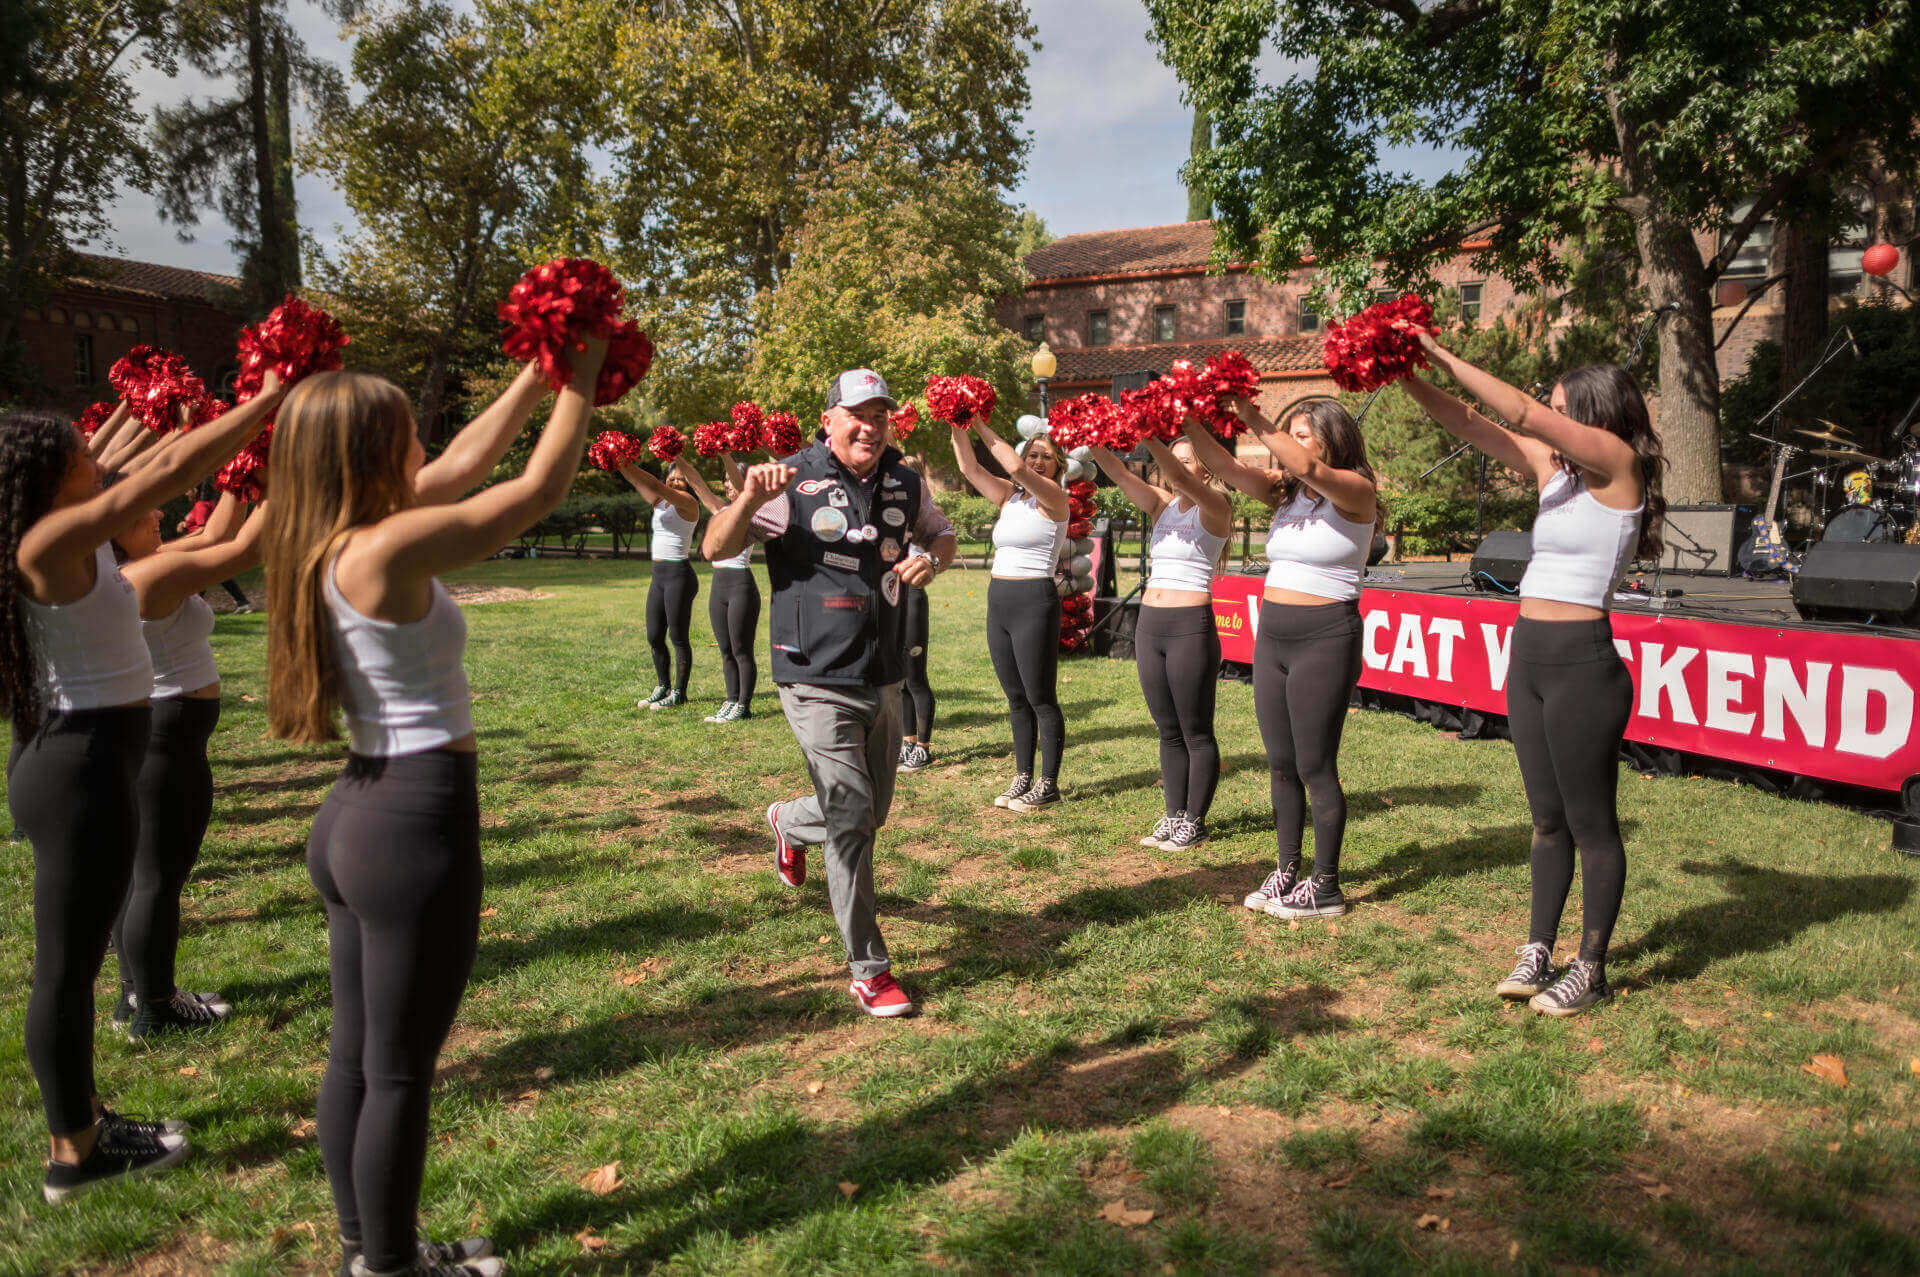 President Steve Perez runs through Expressions Dance team with raised pom poms as the campus community enjoys the Alumni and Family Weekend BBQ barbecue as part of Wildcat Weekend